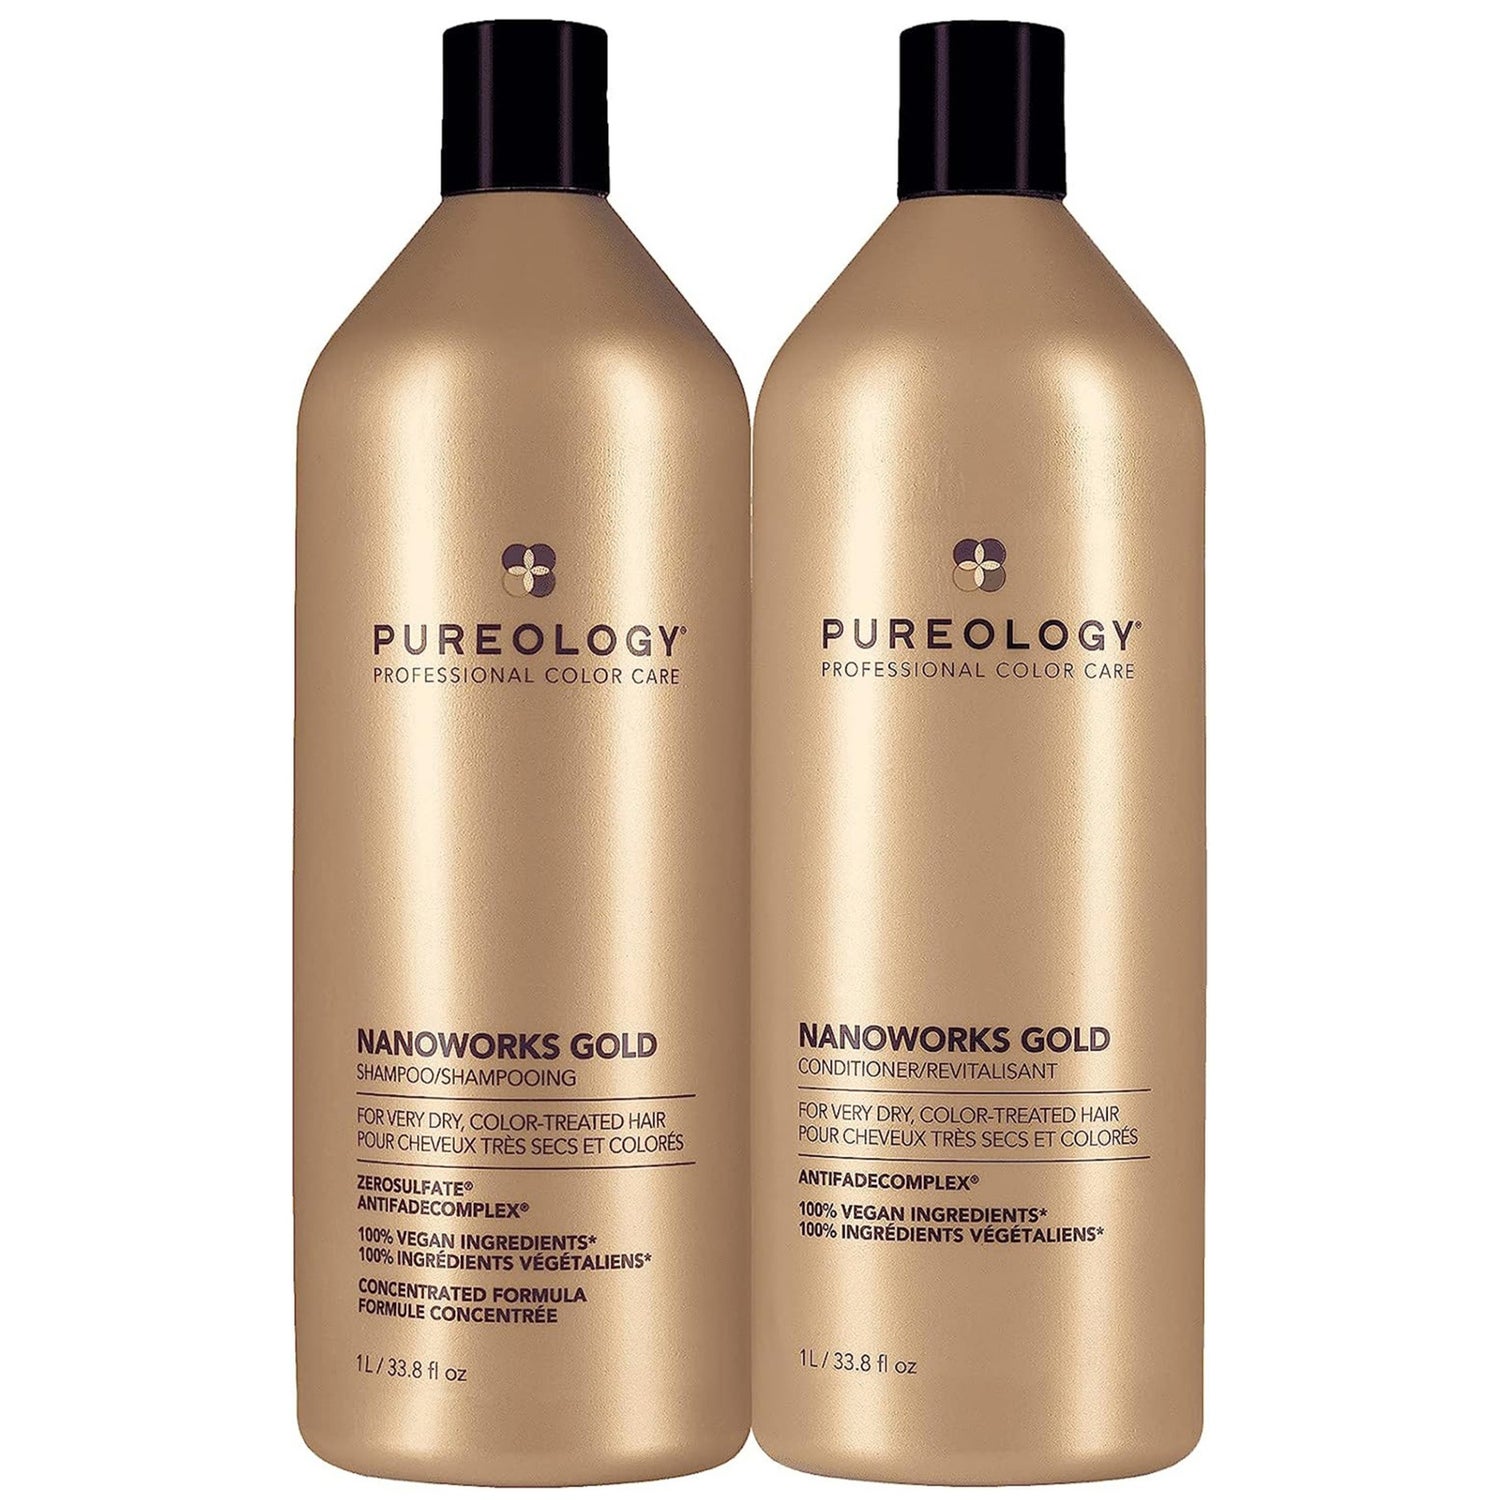 Pureology Nanoworks Gold Shampoo 1000ml and Conditioner 1000ml Routine For Very Dry, Colour Treated Hair